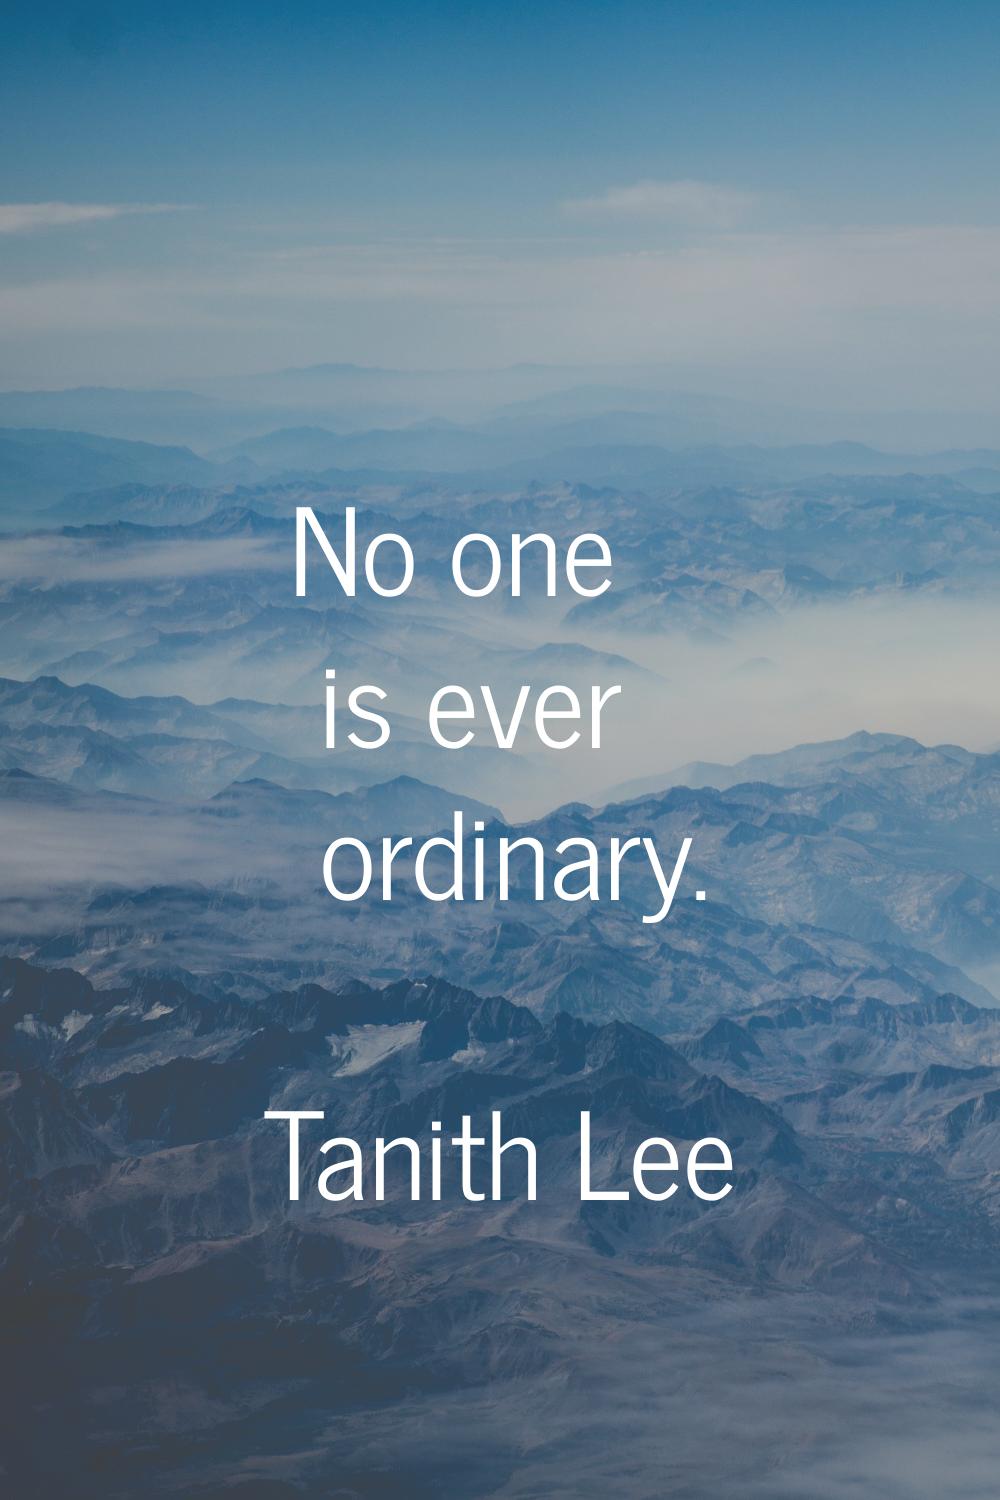 No one is ever ordinary.